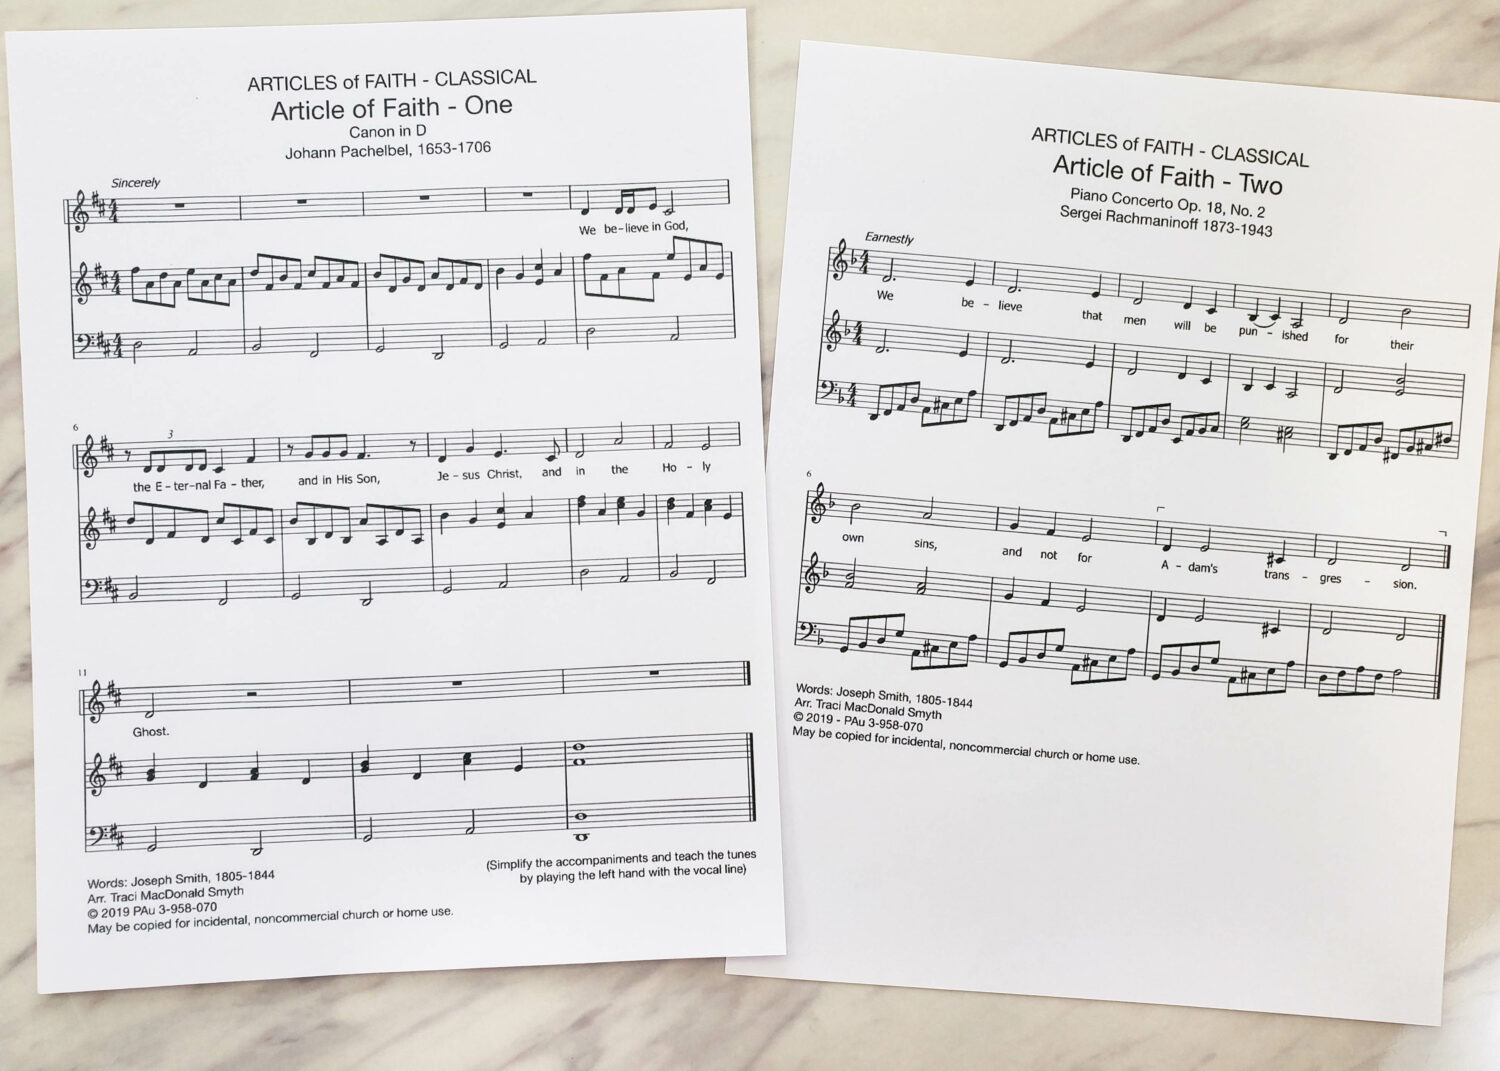 Classical Articles of Faith sheet music - unique way to teach the Articles of Faith using classical compositions! Fun way to teach them in singing time for LDS Primary music leaders.